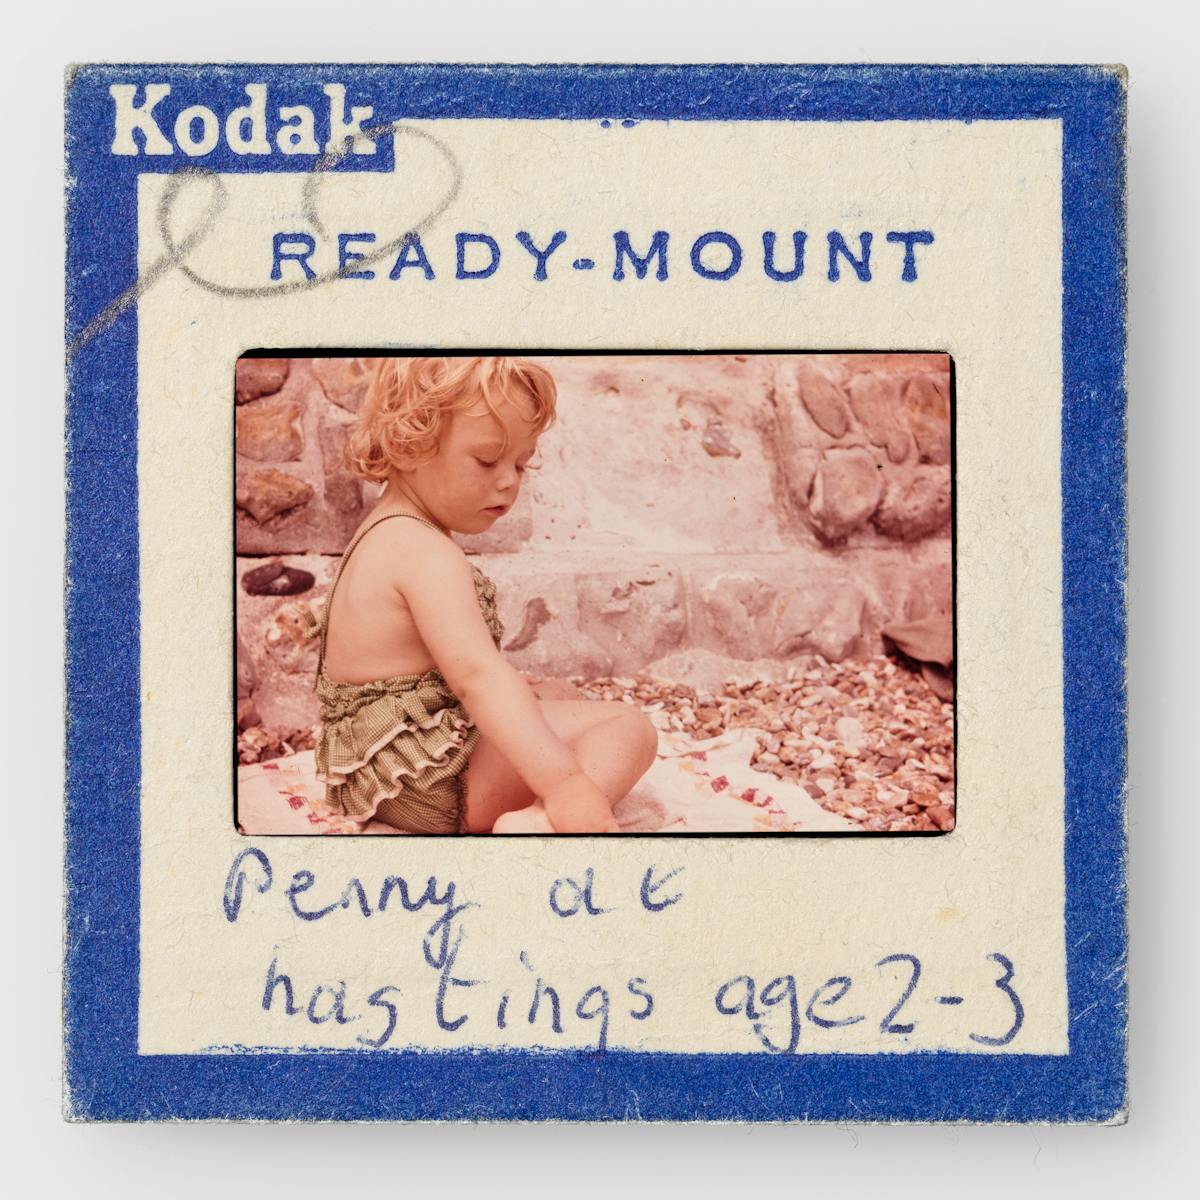 Photograph of a colour 35mm transparency mounted in a cardboard side holder, resting on a white background. The transparency shows a young girl in a frilly green bathing suit sitting on a towel on a shingle beach, by a stone wall. The slide mount has a blue border around the edge with Kodak Ready-mount printed on it. A hand written note on the mount reads, "Penny at Hastings age 2-3".